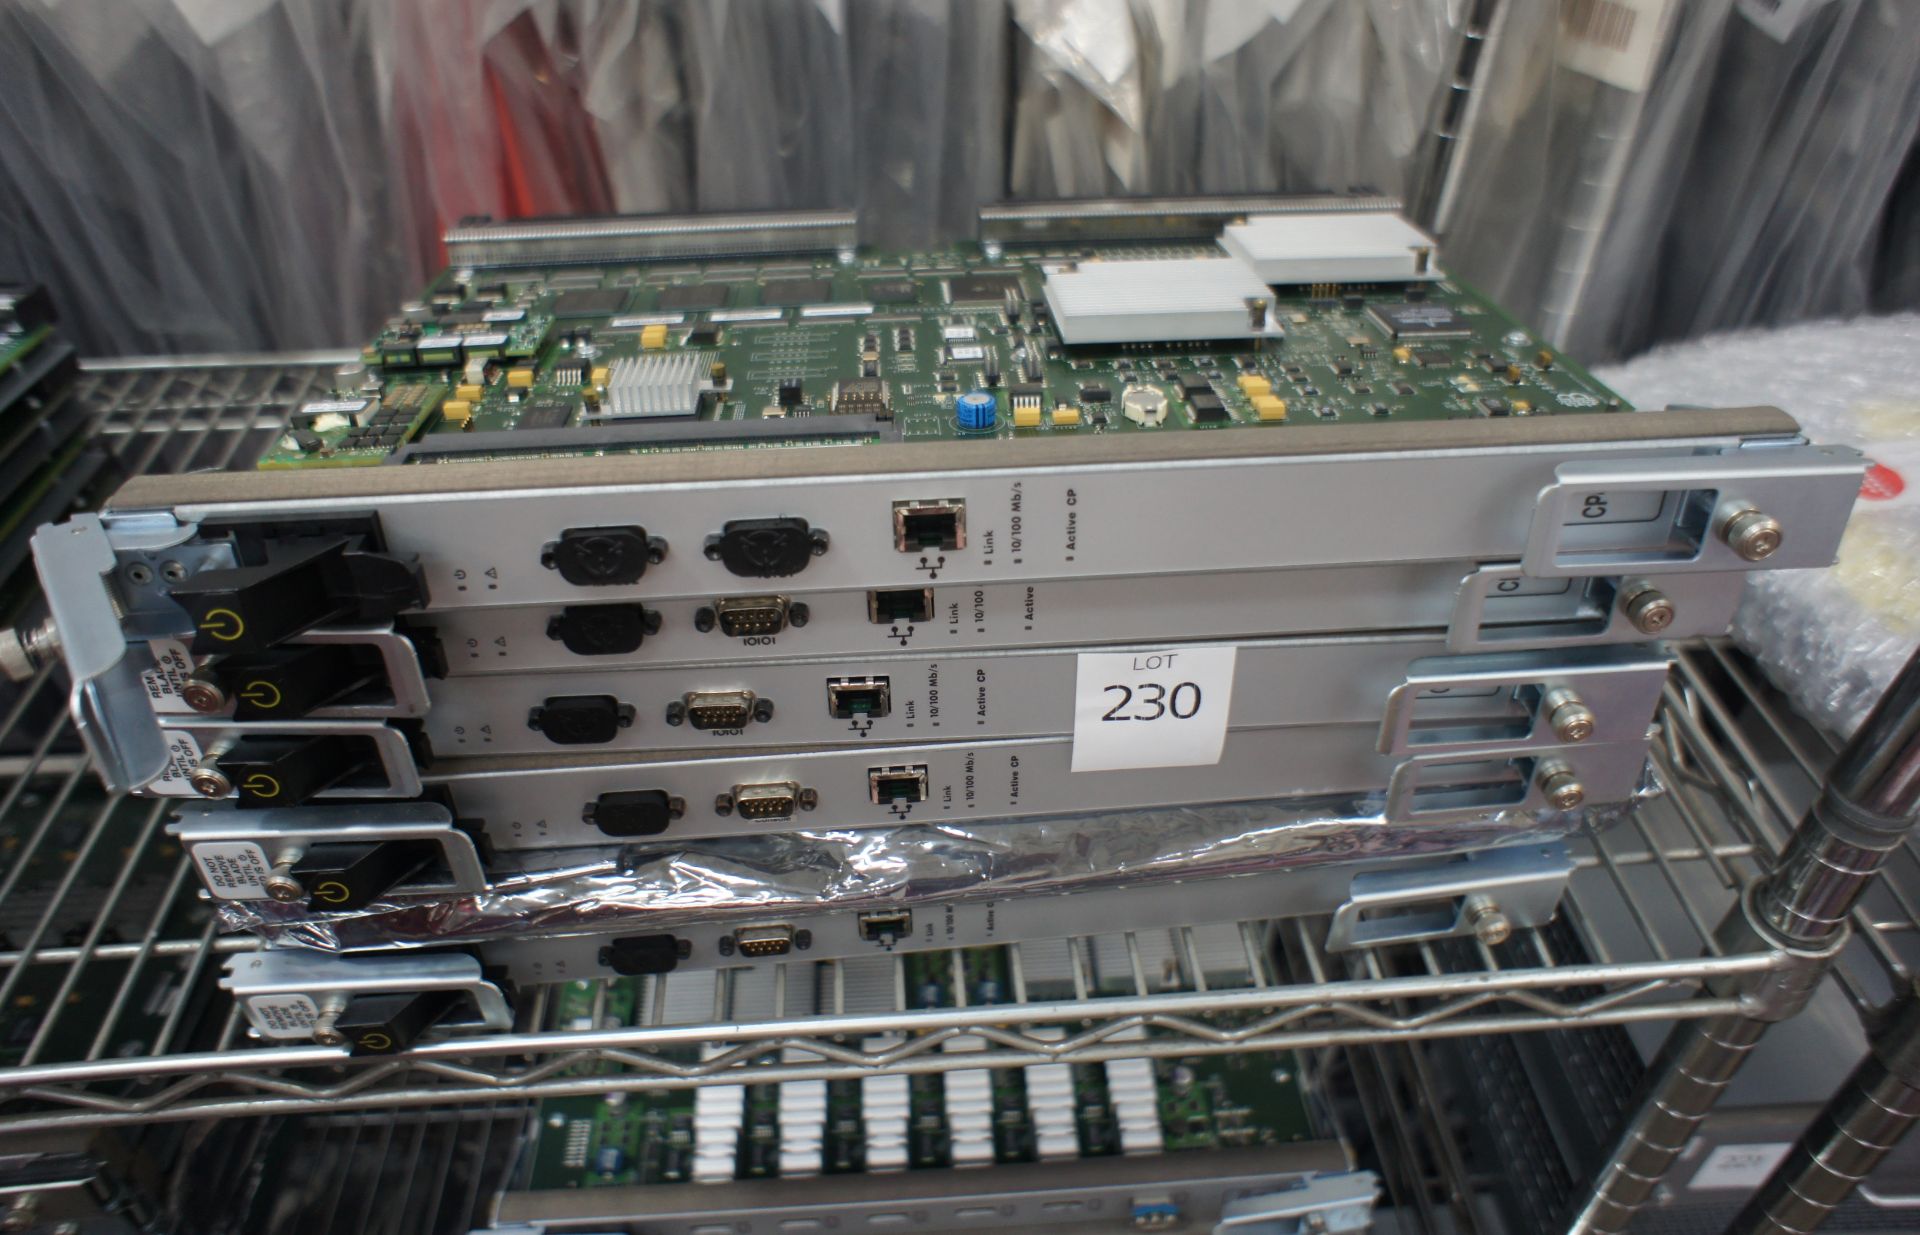 3 x Cisco DS-CAC-6000W Power Supplies (unboxed), 1 x Brocade FastIron FCX624-E-ADV switch, FCX, 3 - Image 13 of 34